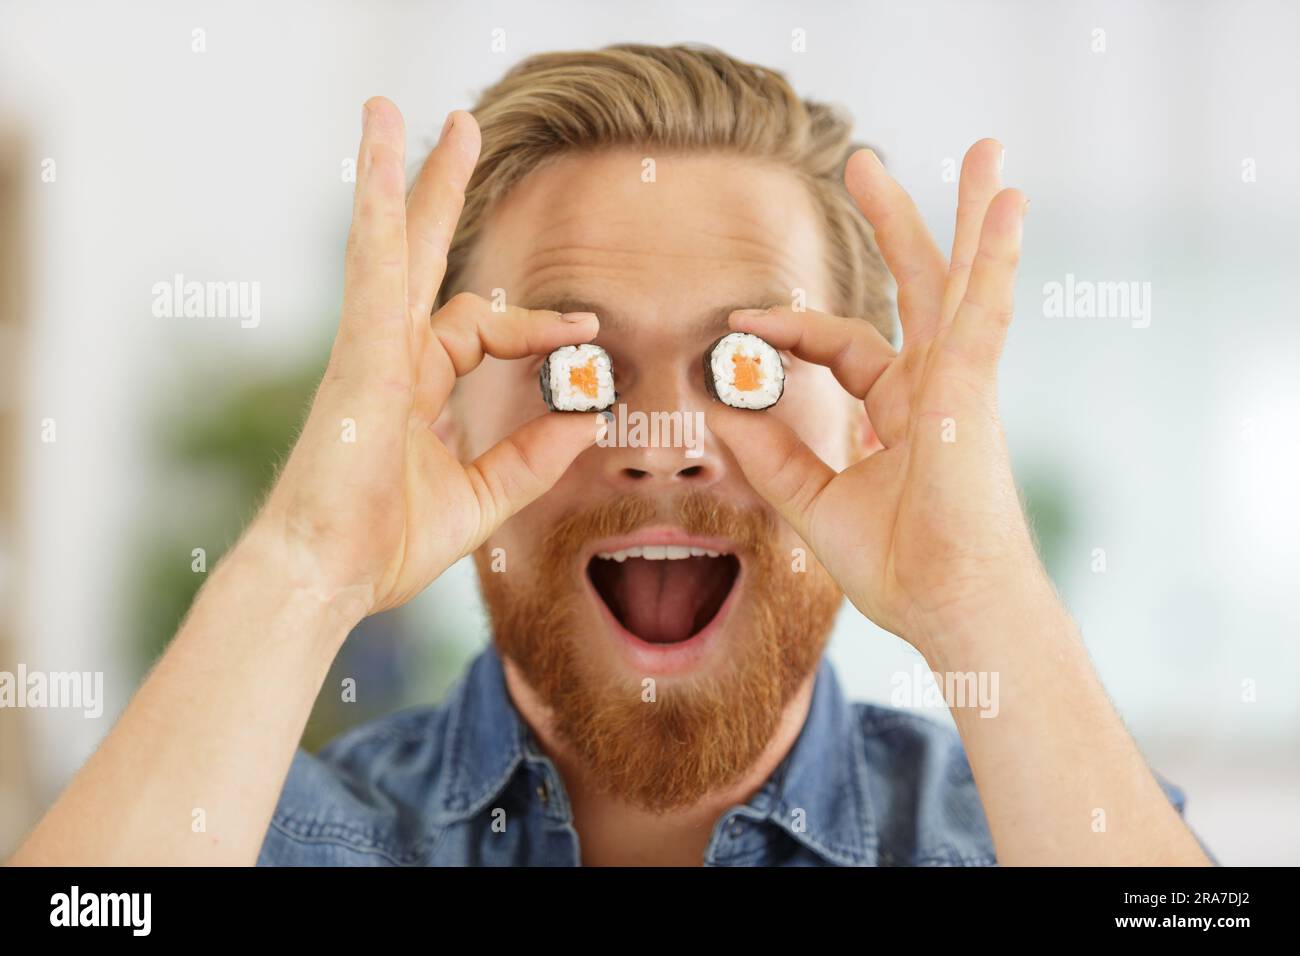 young man with sushi eyes Stock Photo